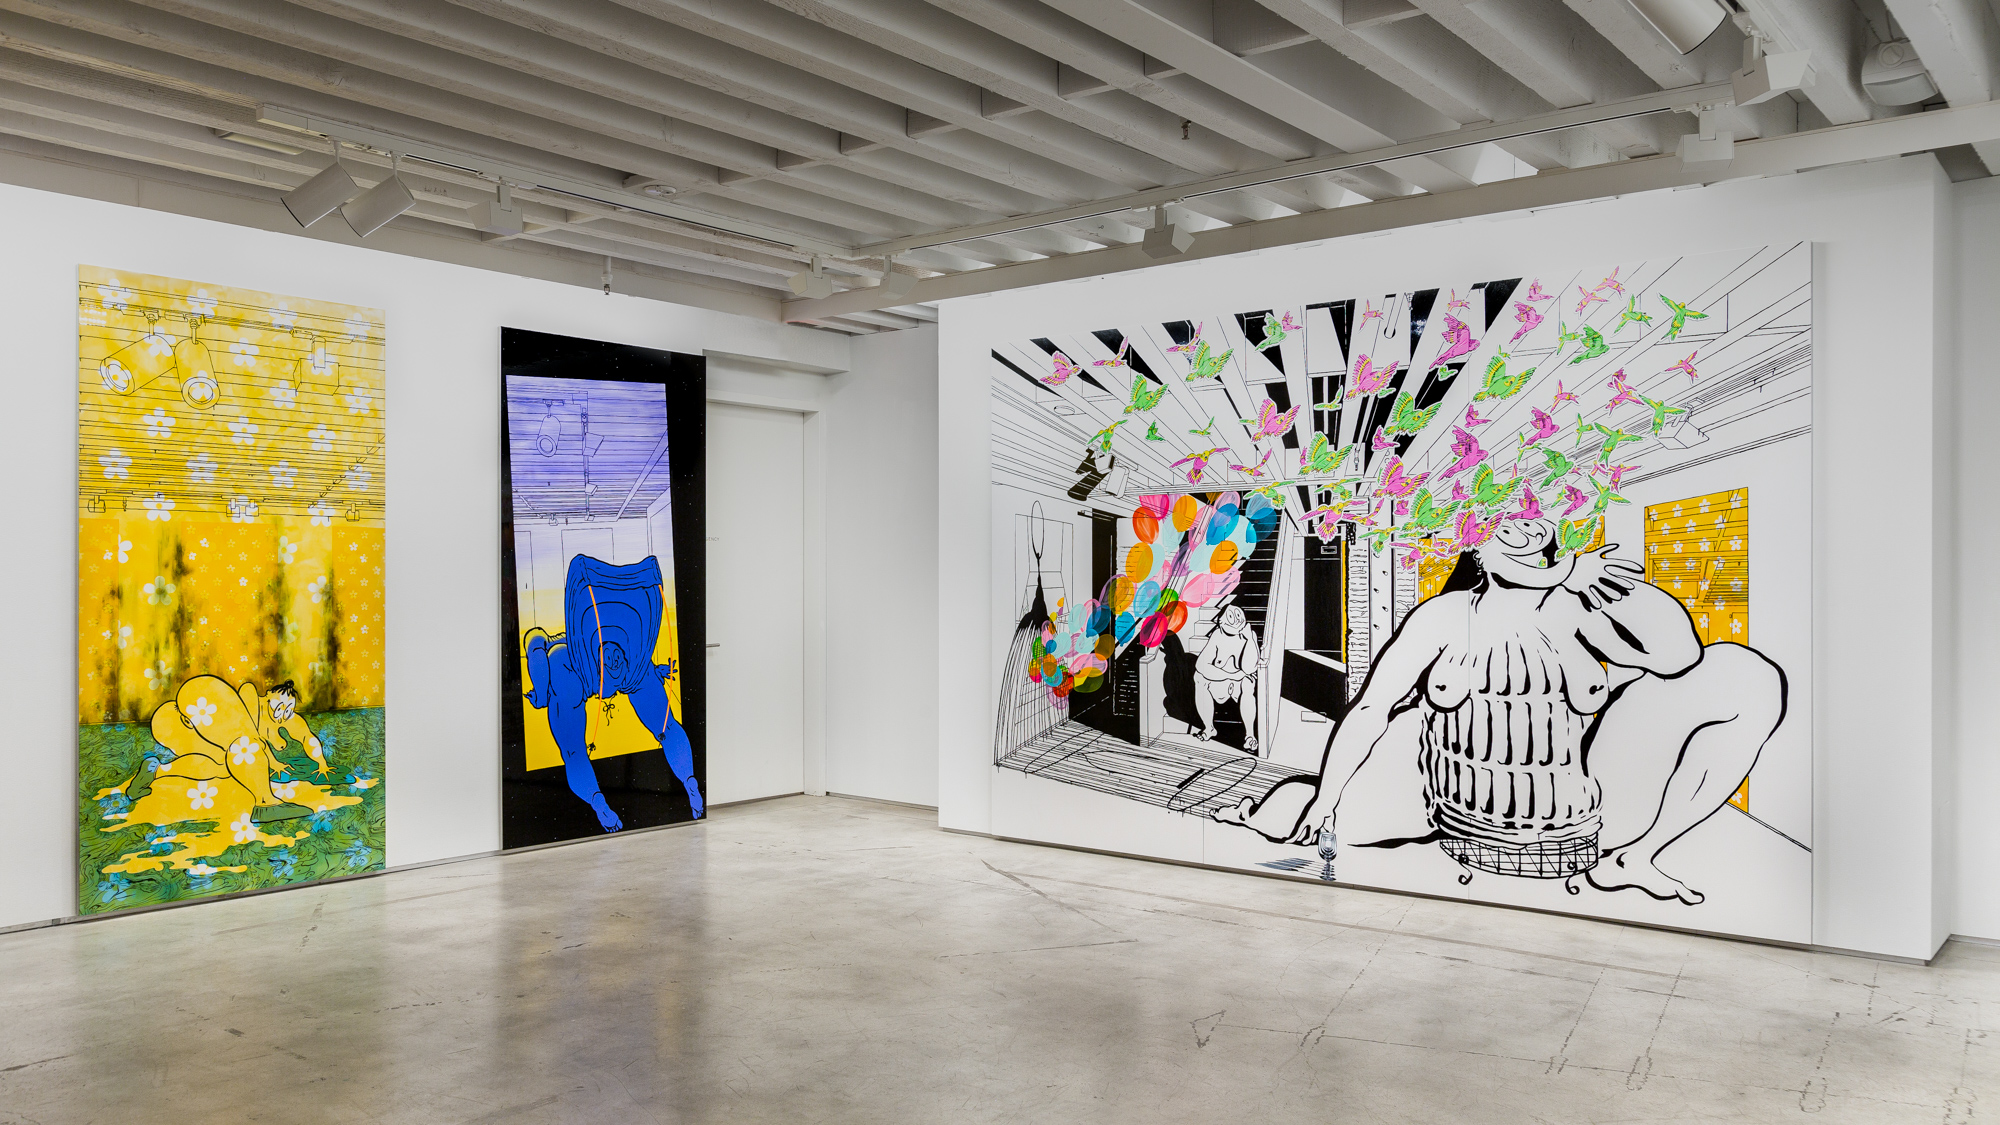 Installation view, Ebecho Muslimova: Scenes in the Sublevel, The Drawing Center, New York, NY, 2021. Photo by Daniel Terna.